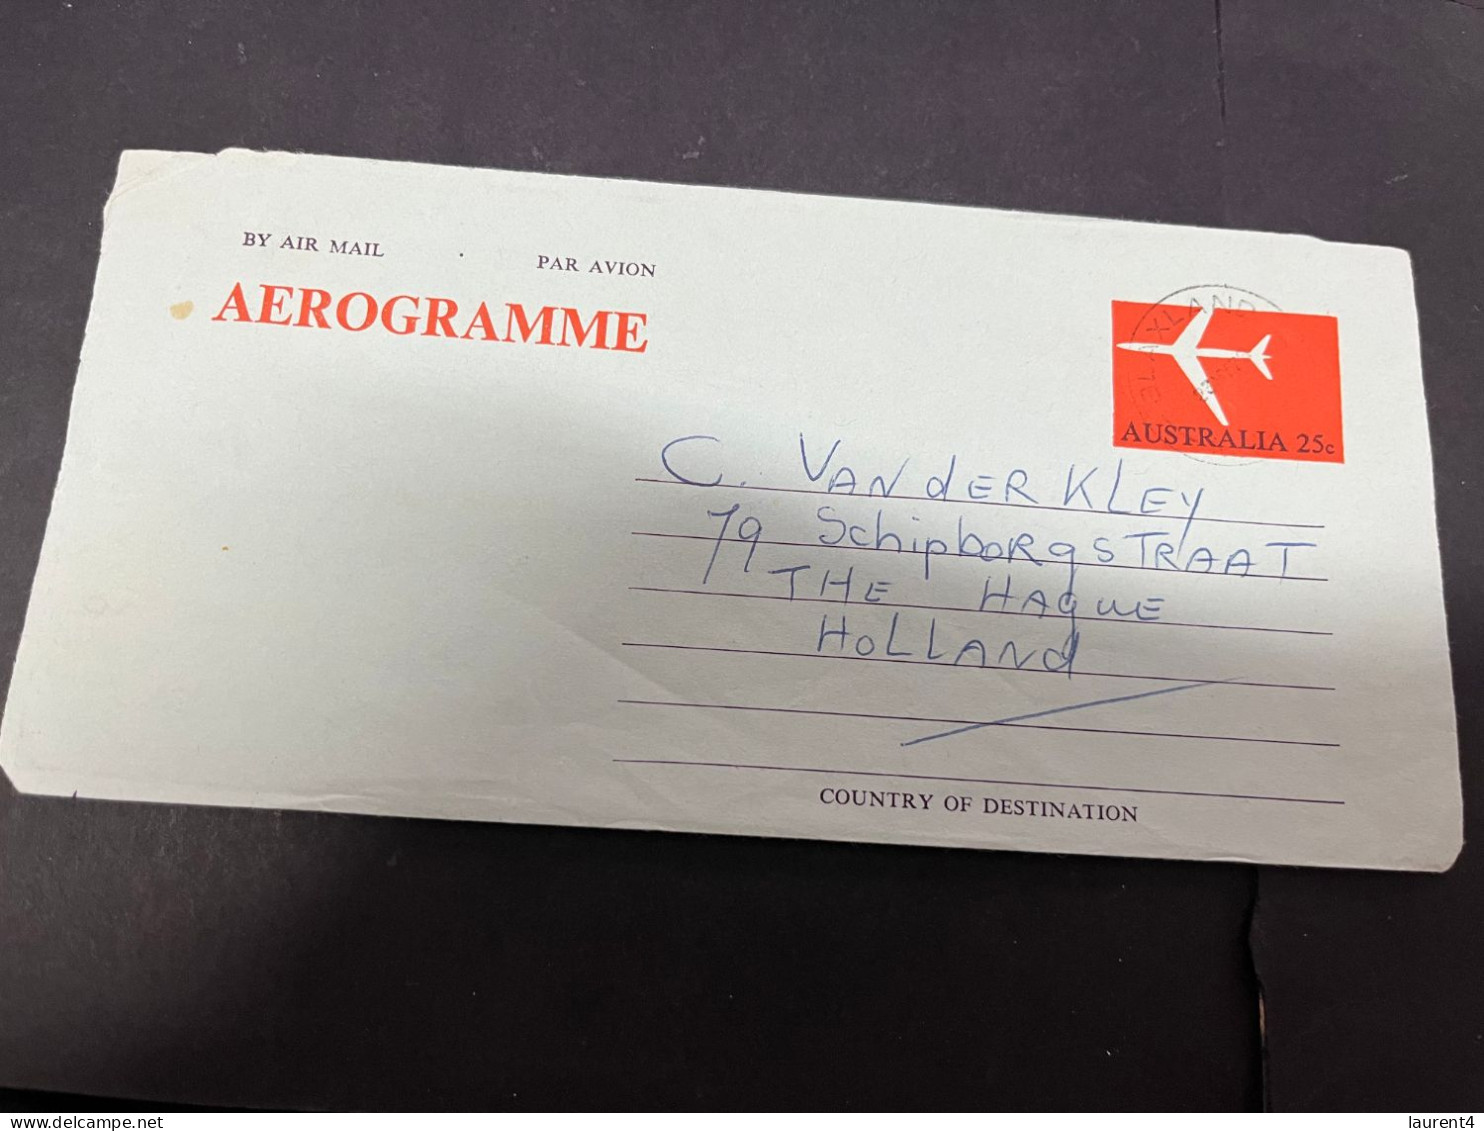 25-2-2024 (1 Y 14) Australia (1 Aerogramme Covers) 25 C (posted To Netherlands) - Aerogramme